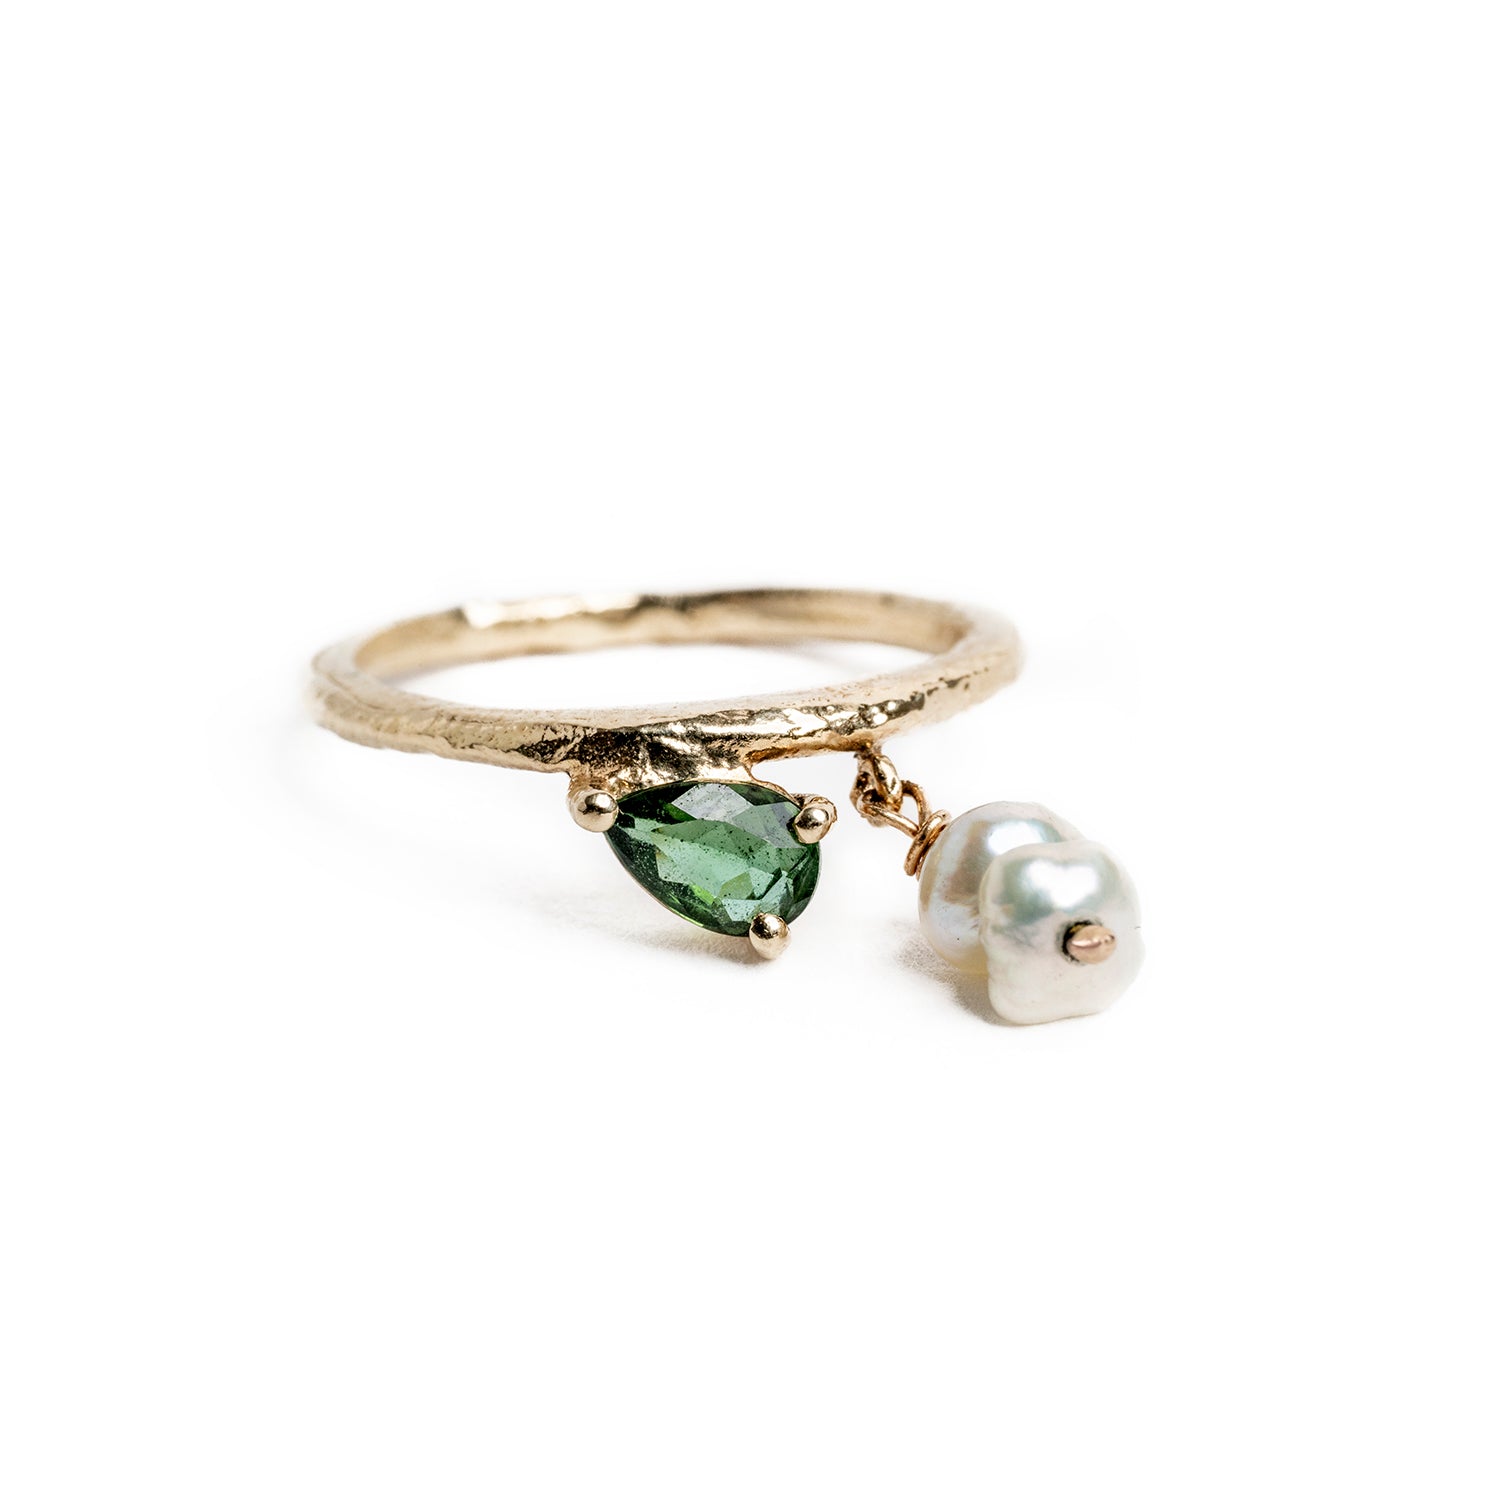 Uji Ring in 14K Solid Gold, Tourmaline, and Baroque Pearls